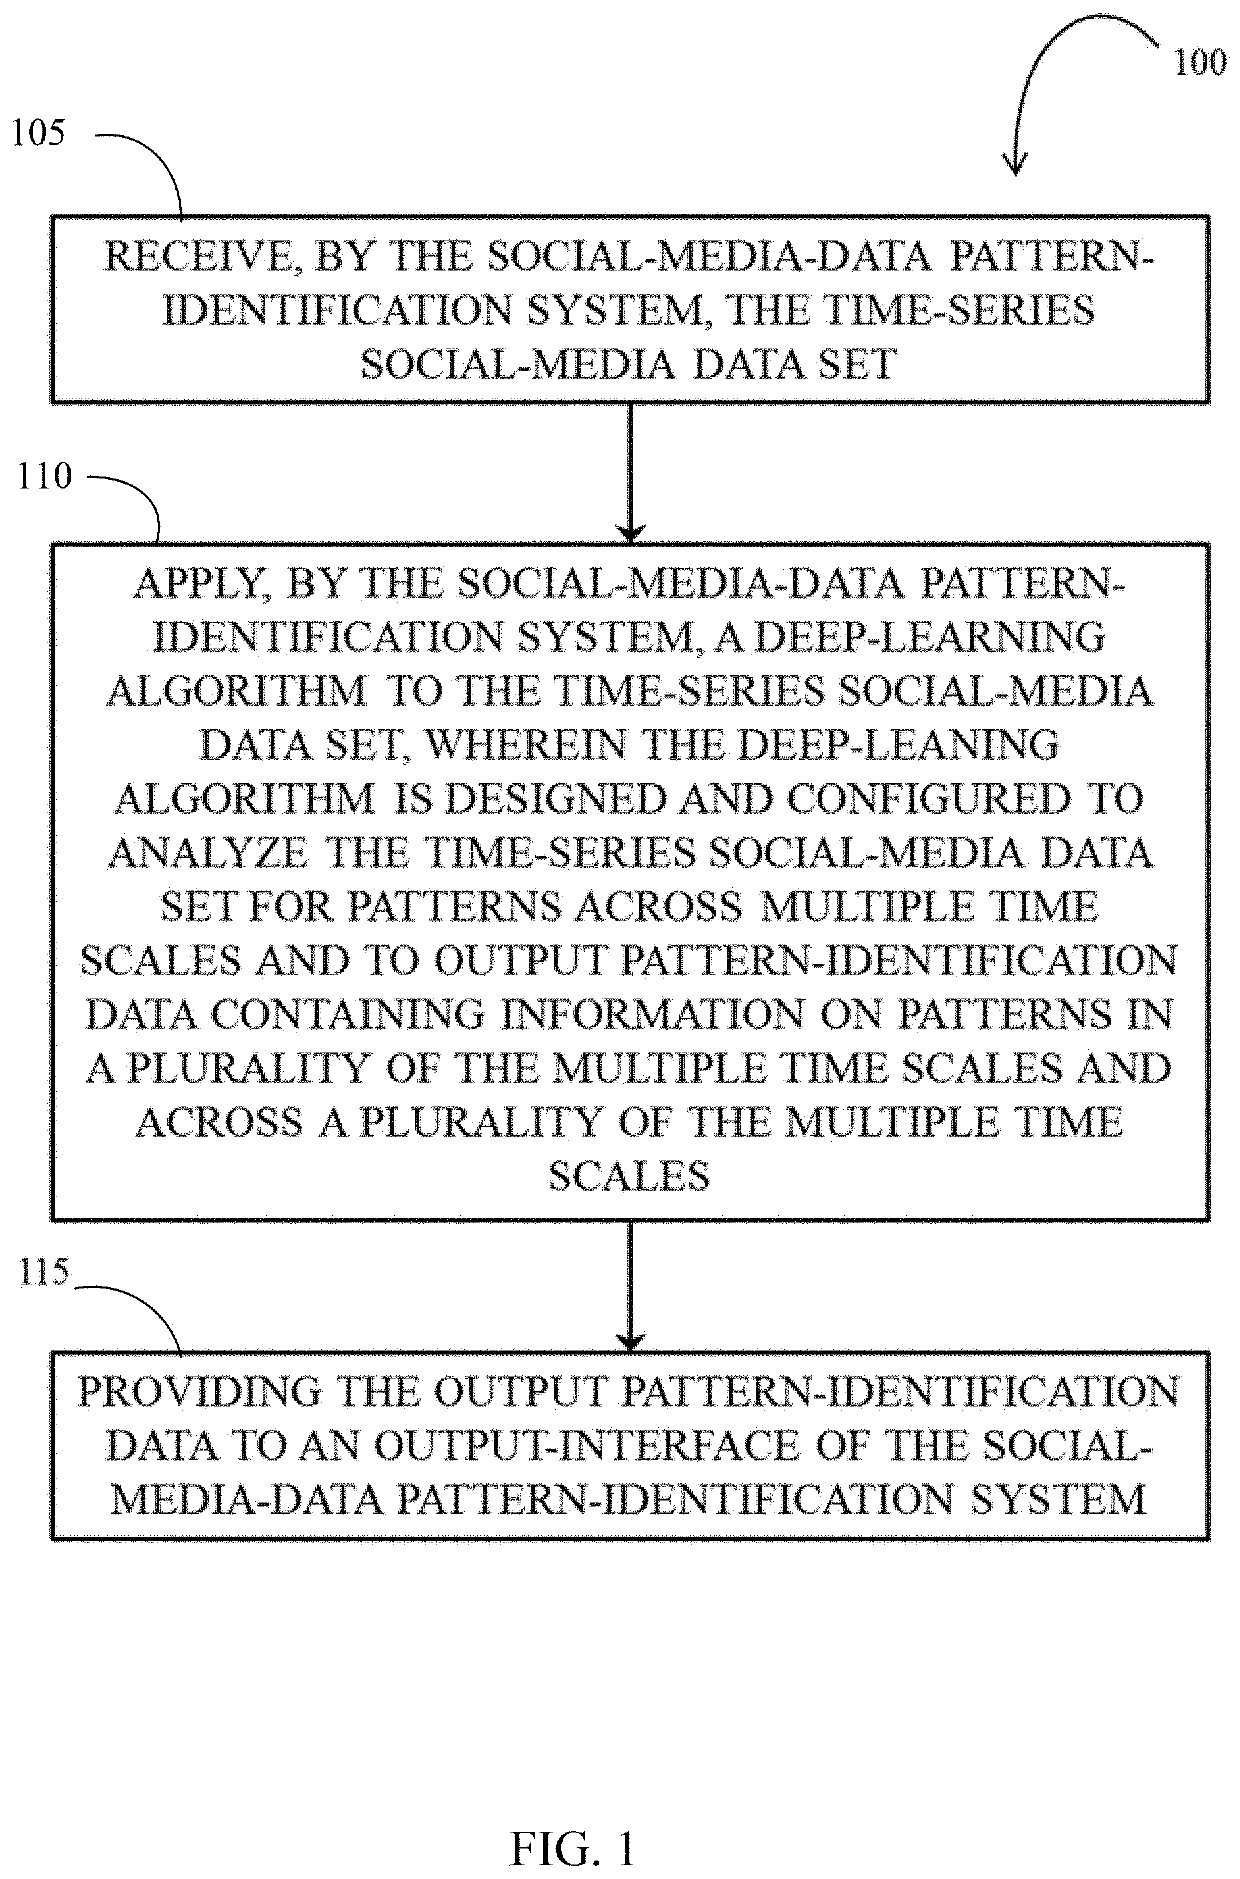 Pattern identification in time-series social media data, and output-dynamics engineering for a dynamic system having one or more multi-scale time-series data sets